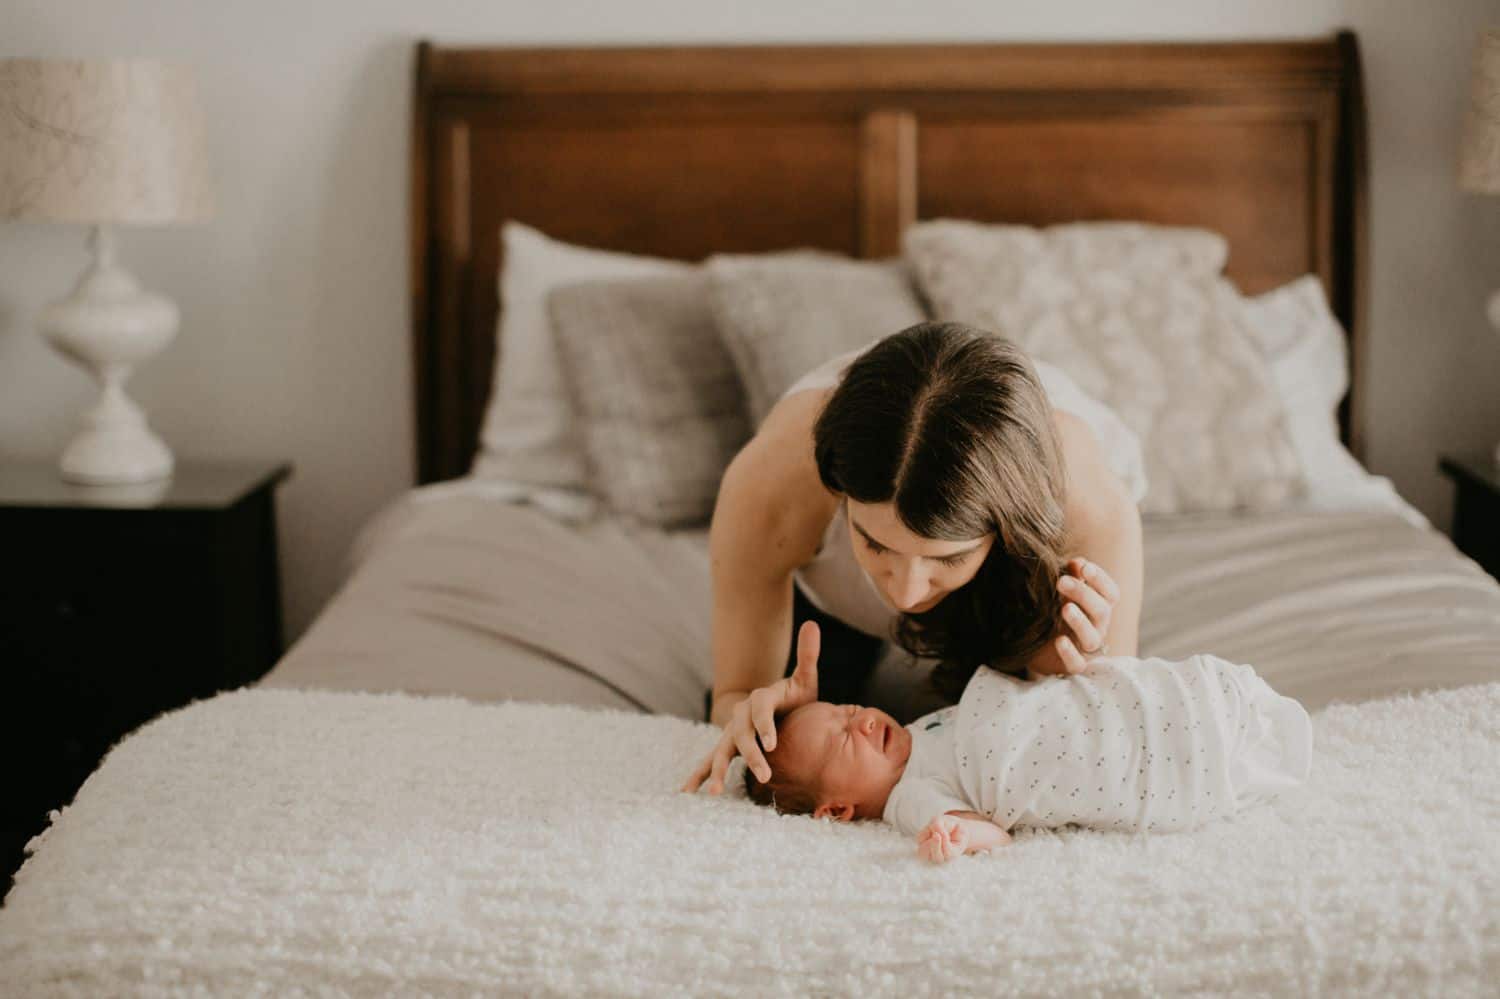 Lifestyle Newborn Photos: A swaddled newborn baby lies at the foot of their parents' bed as Mom kneels over the infant whispering words of comfort.